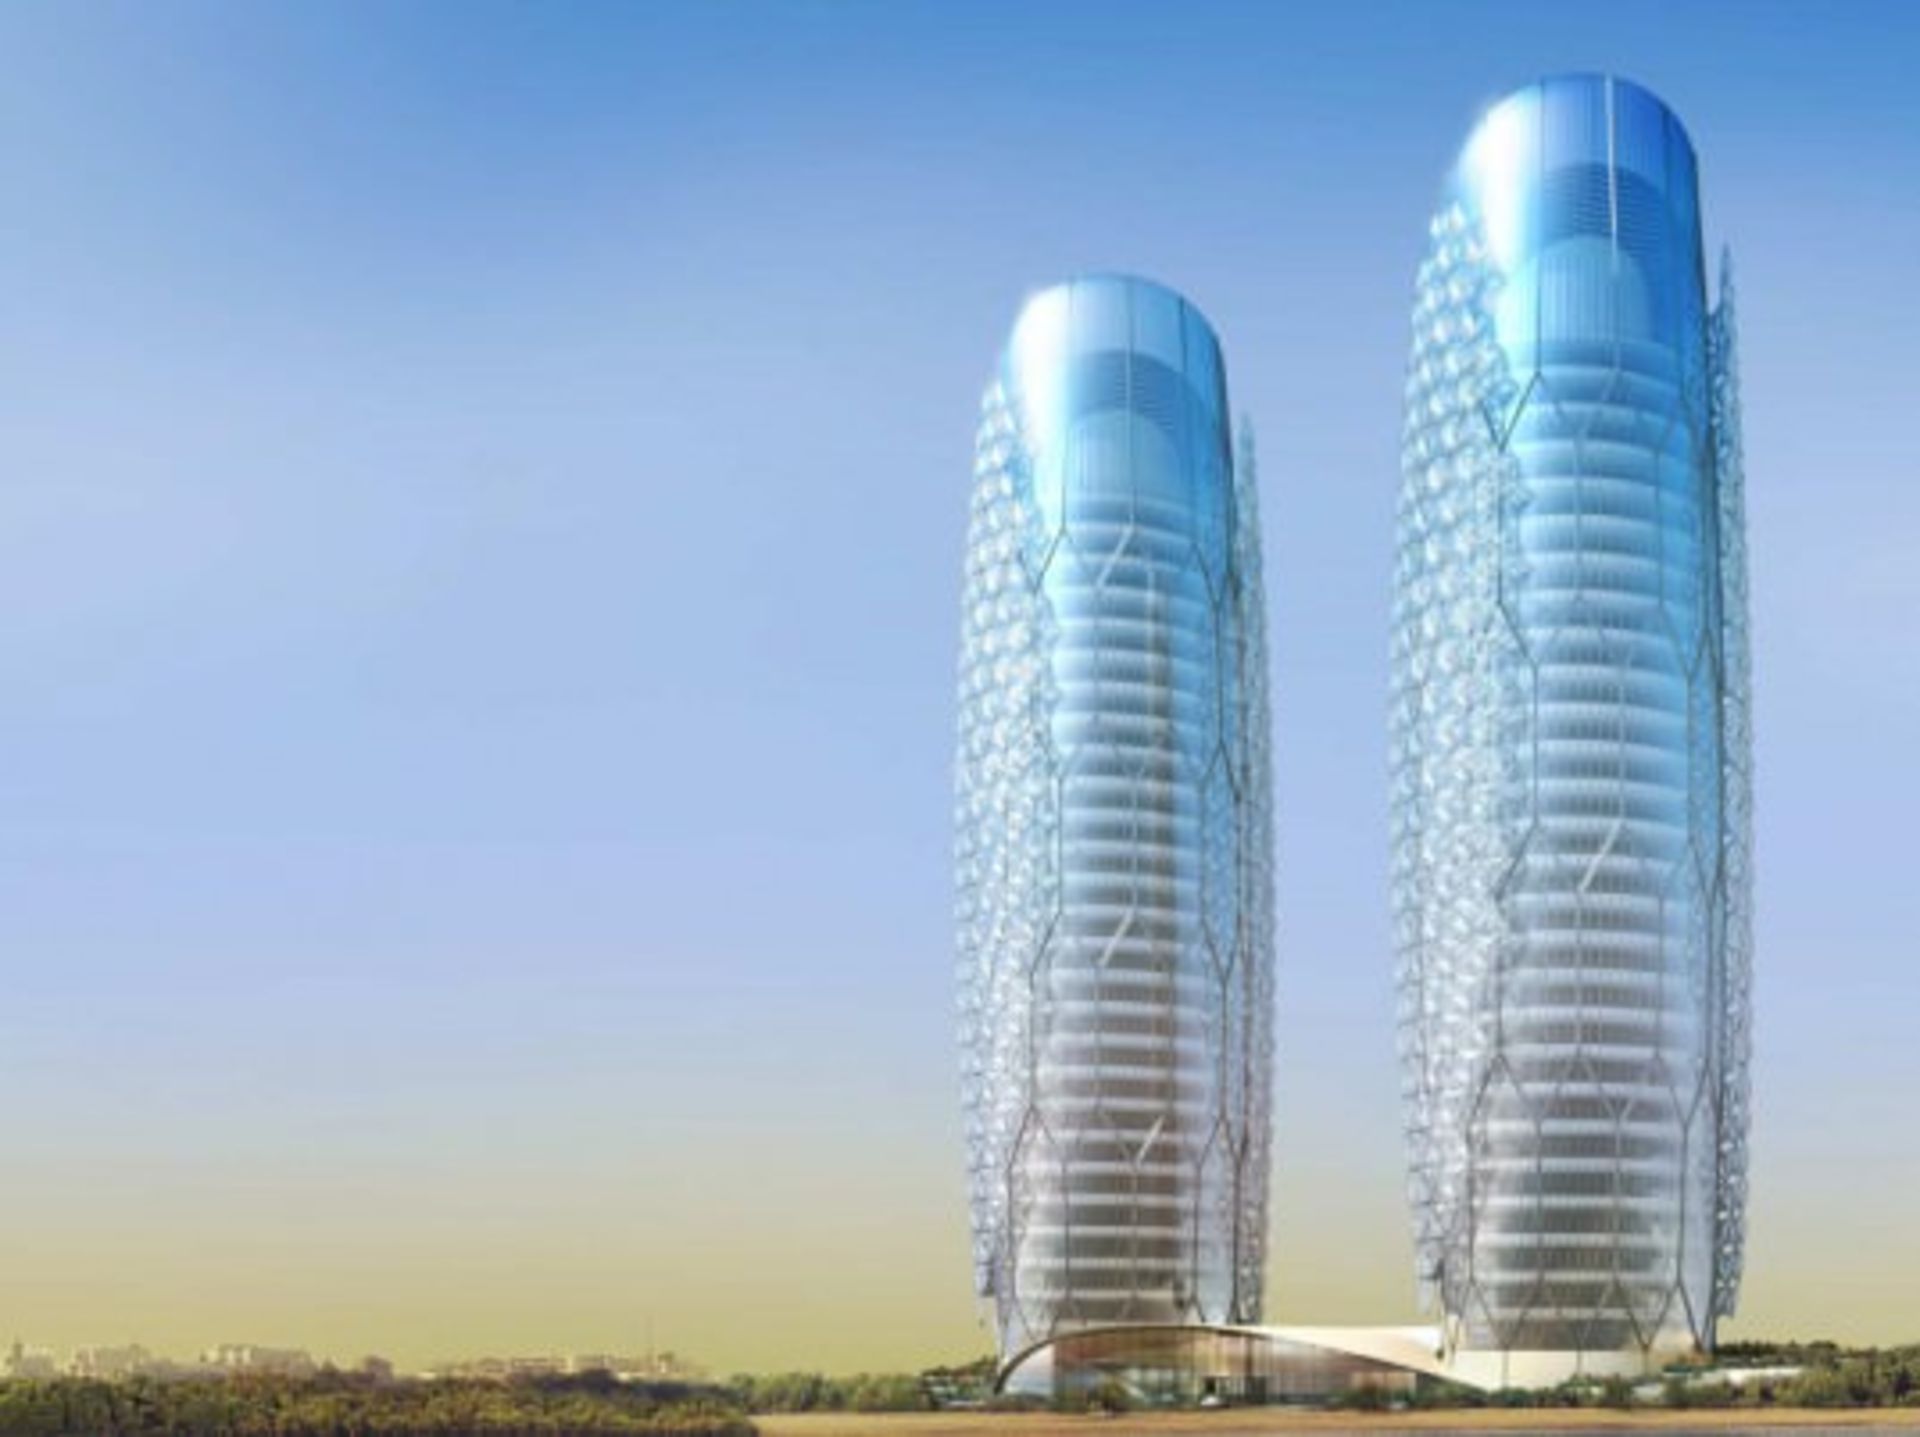 Abu-Dhabi-Investment-Council-Headquarters-Towers-3-537x402